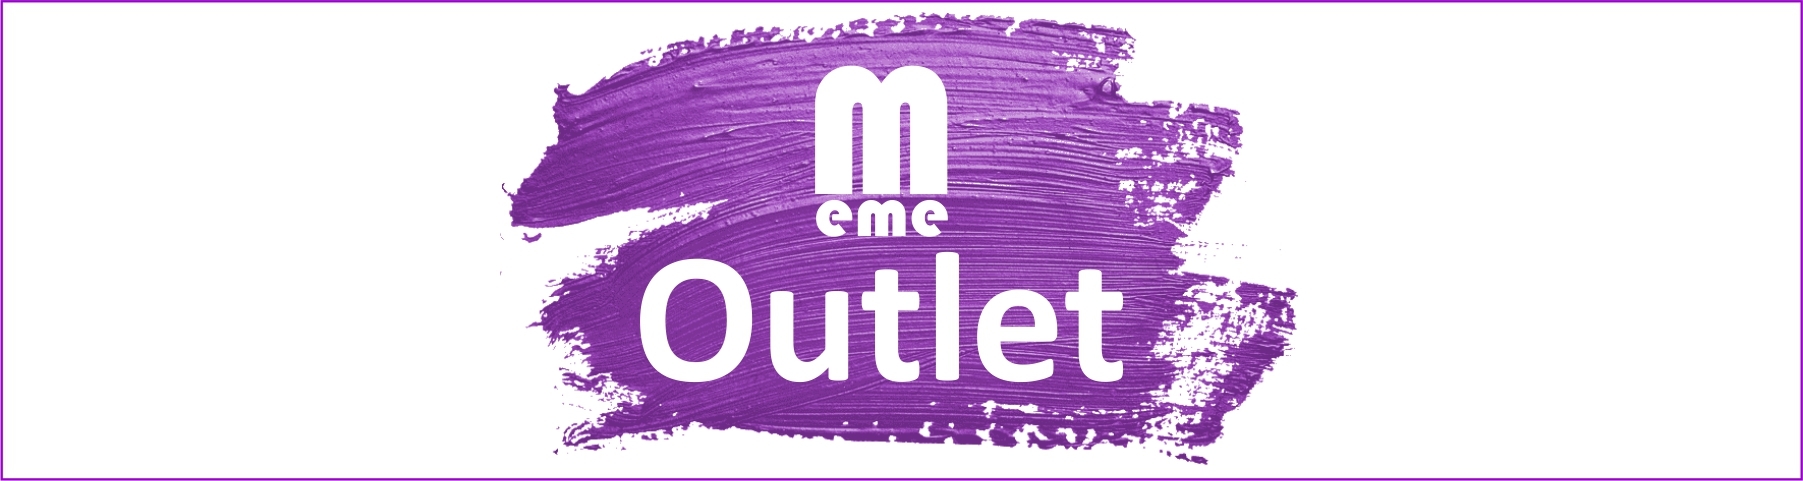 BANNER_OUTLET_SOLO_MANCHA